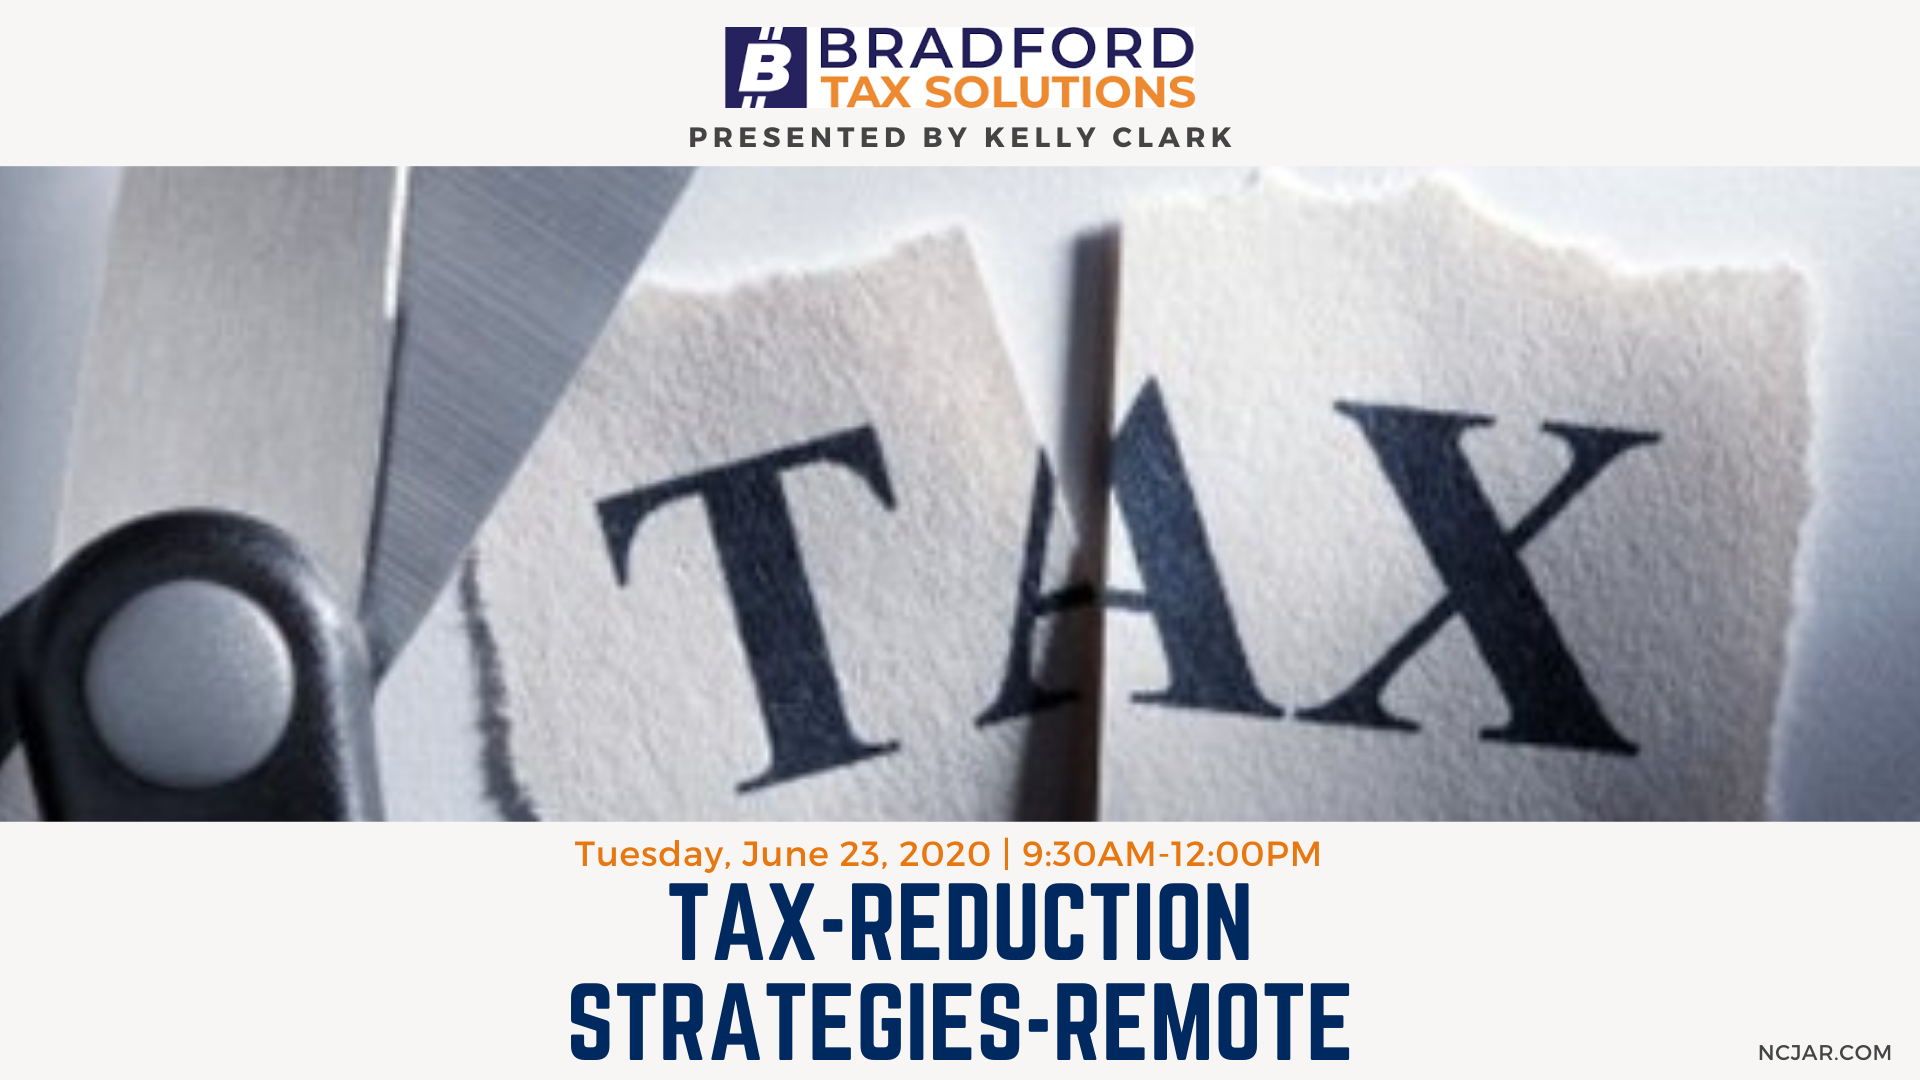 TAX REDUCTION